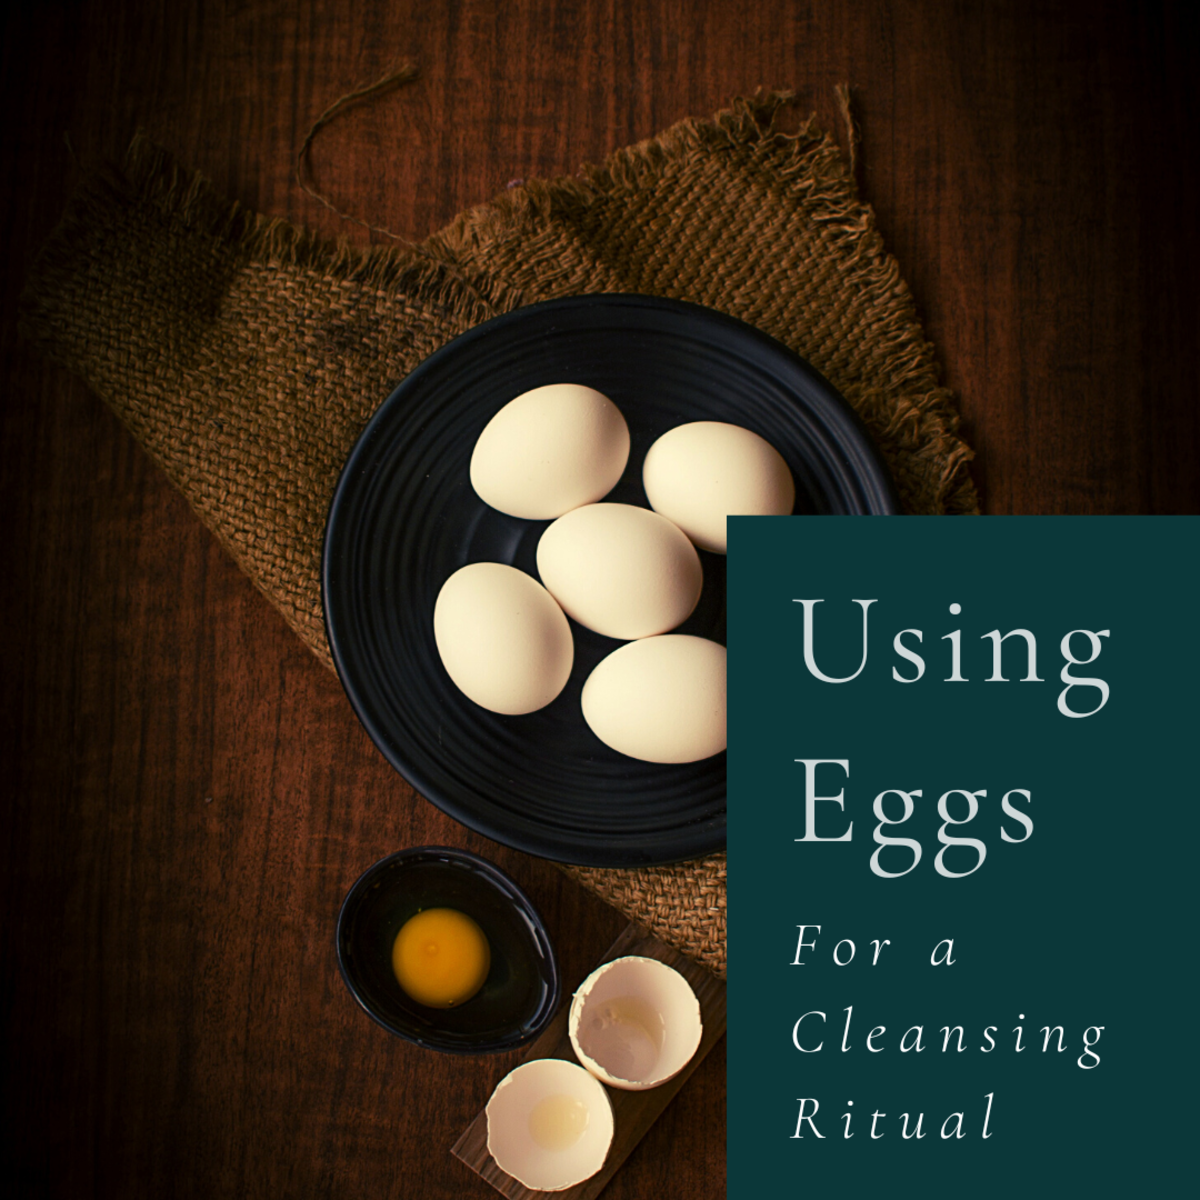 Eggs can be powerful agents in spiritual cleansing rituals.